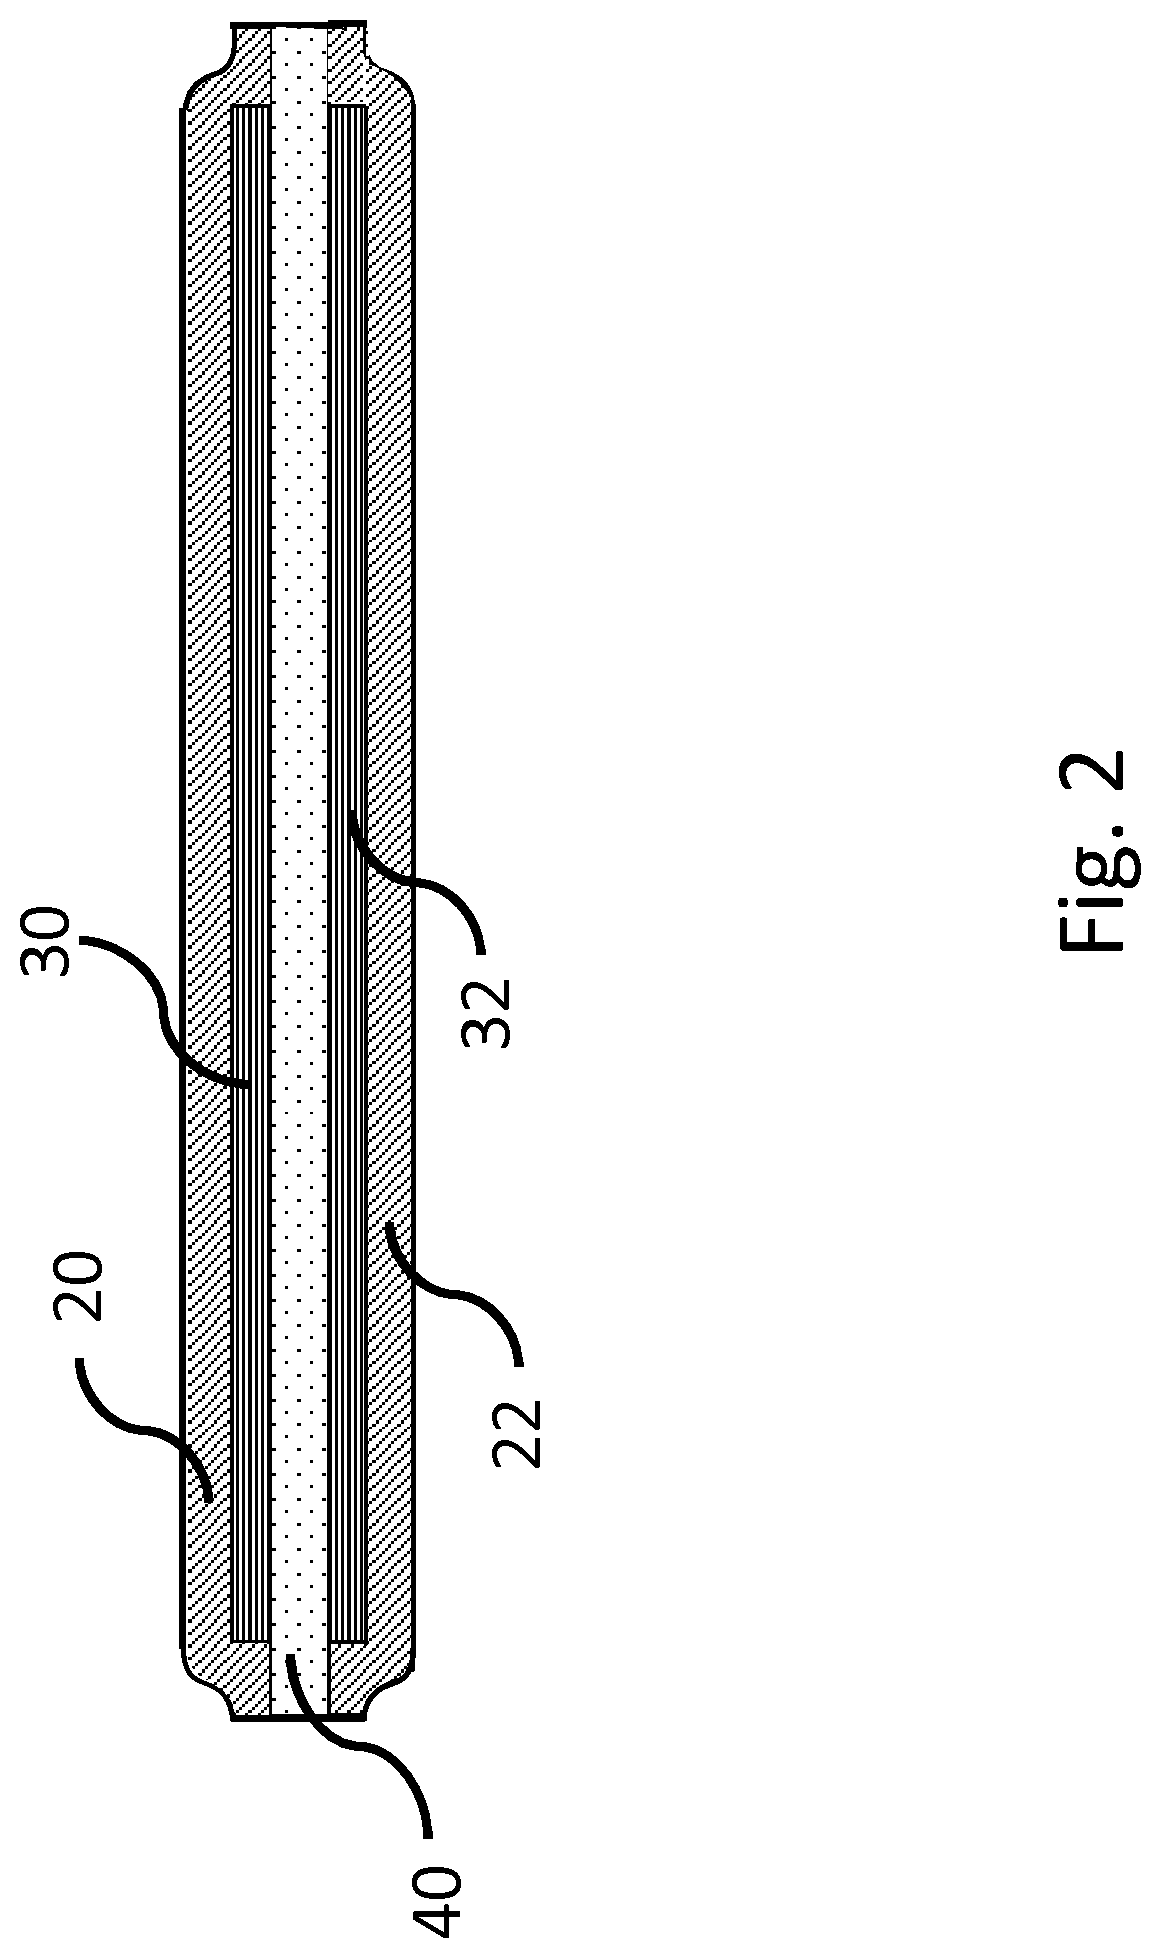 Capacitor for Resonant Circuits in Power Applications